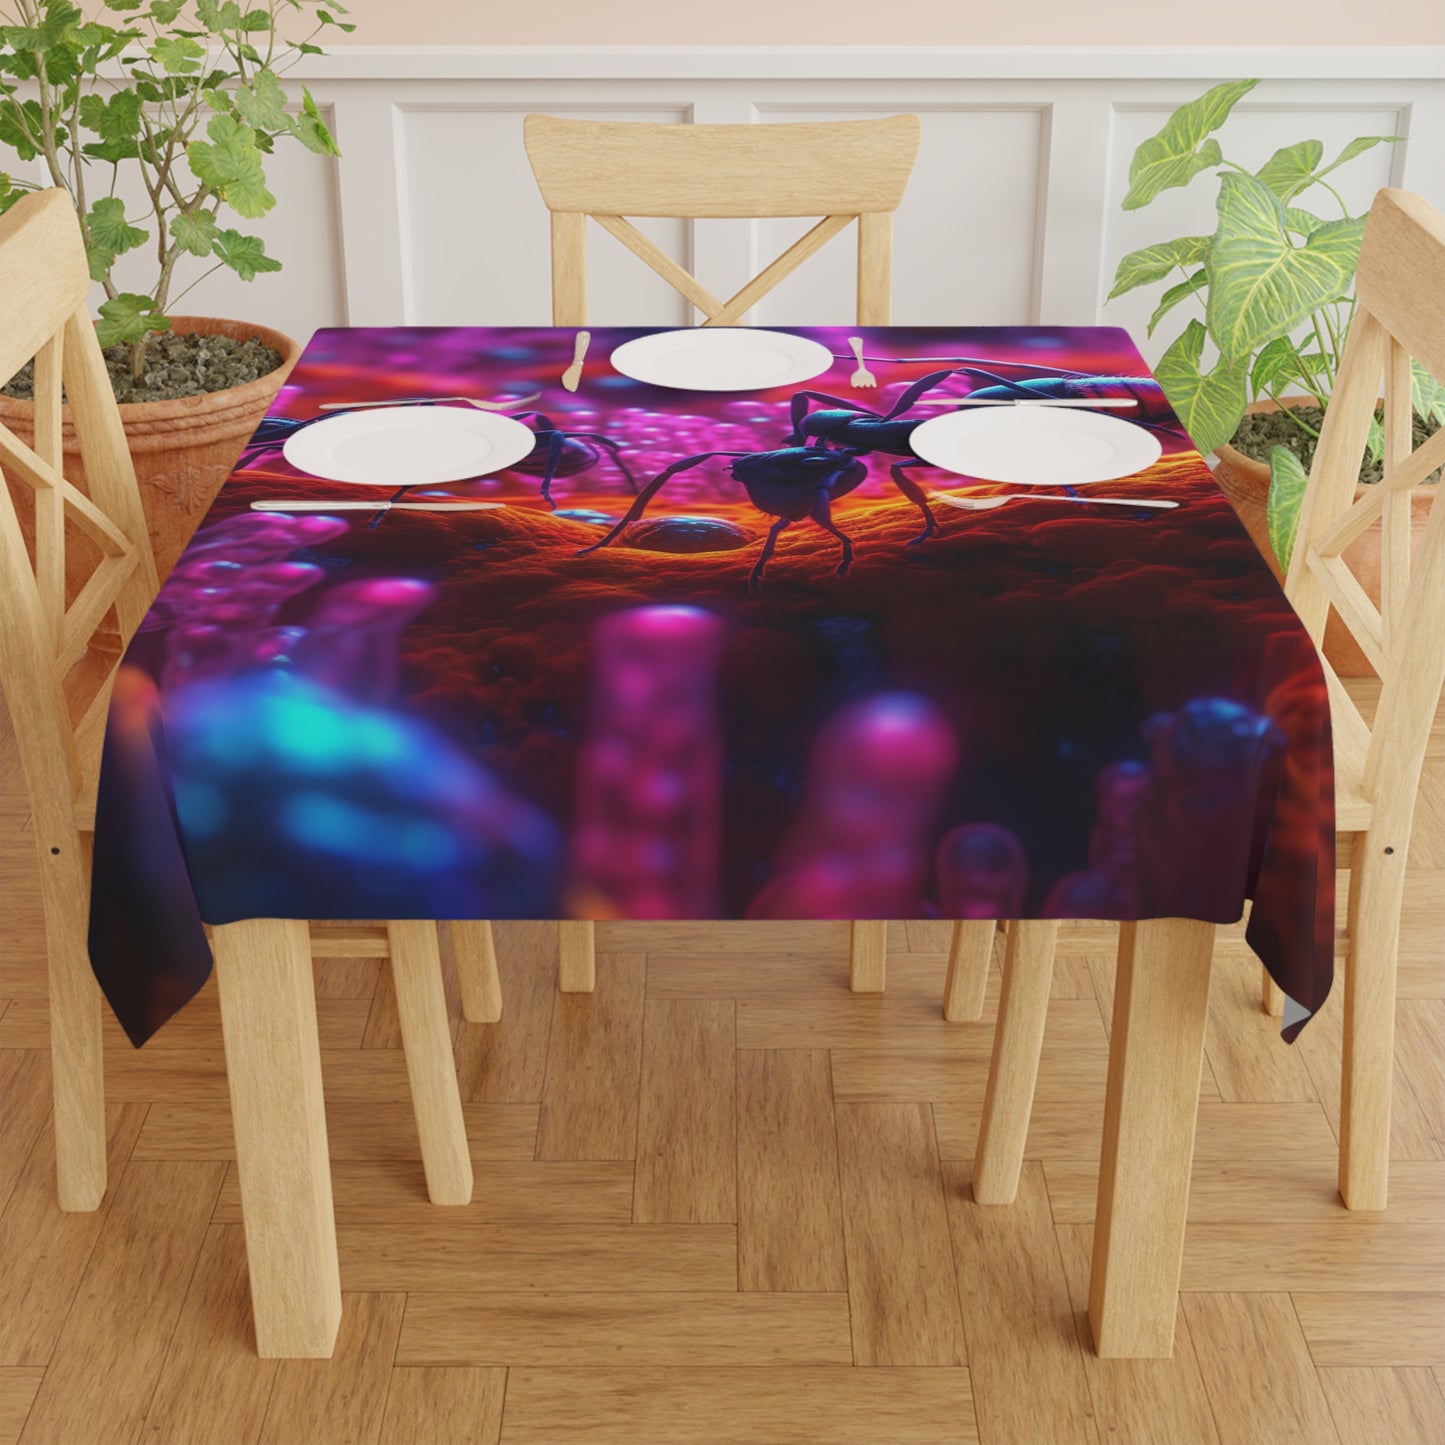 Tablecloth Ants Home 4